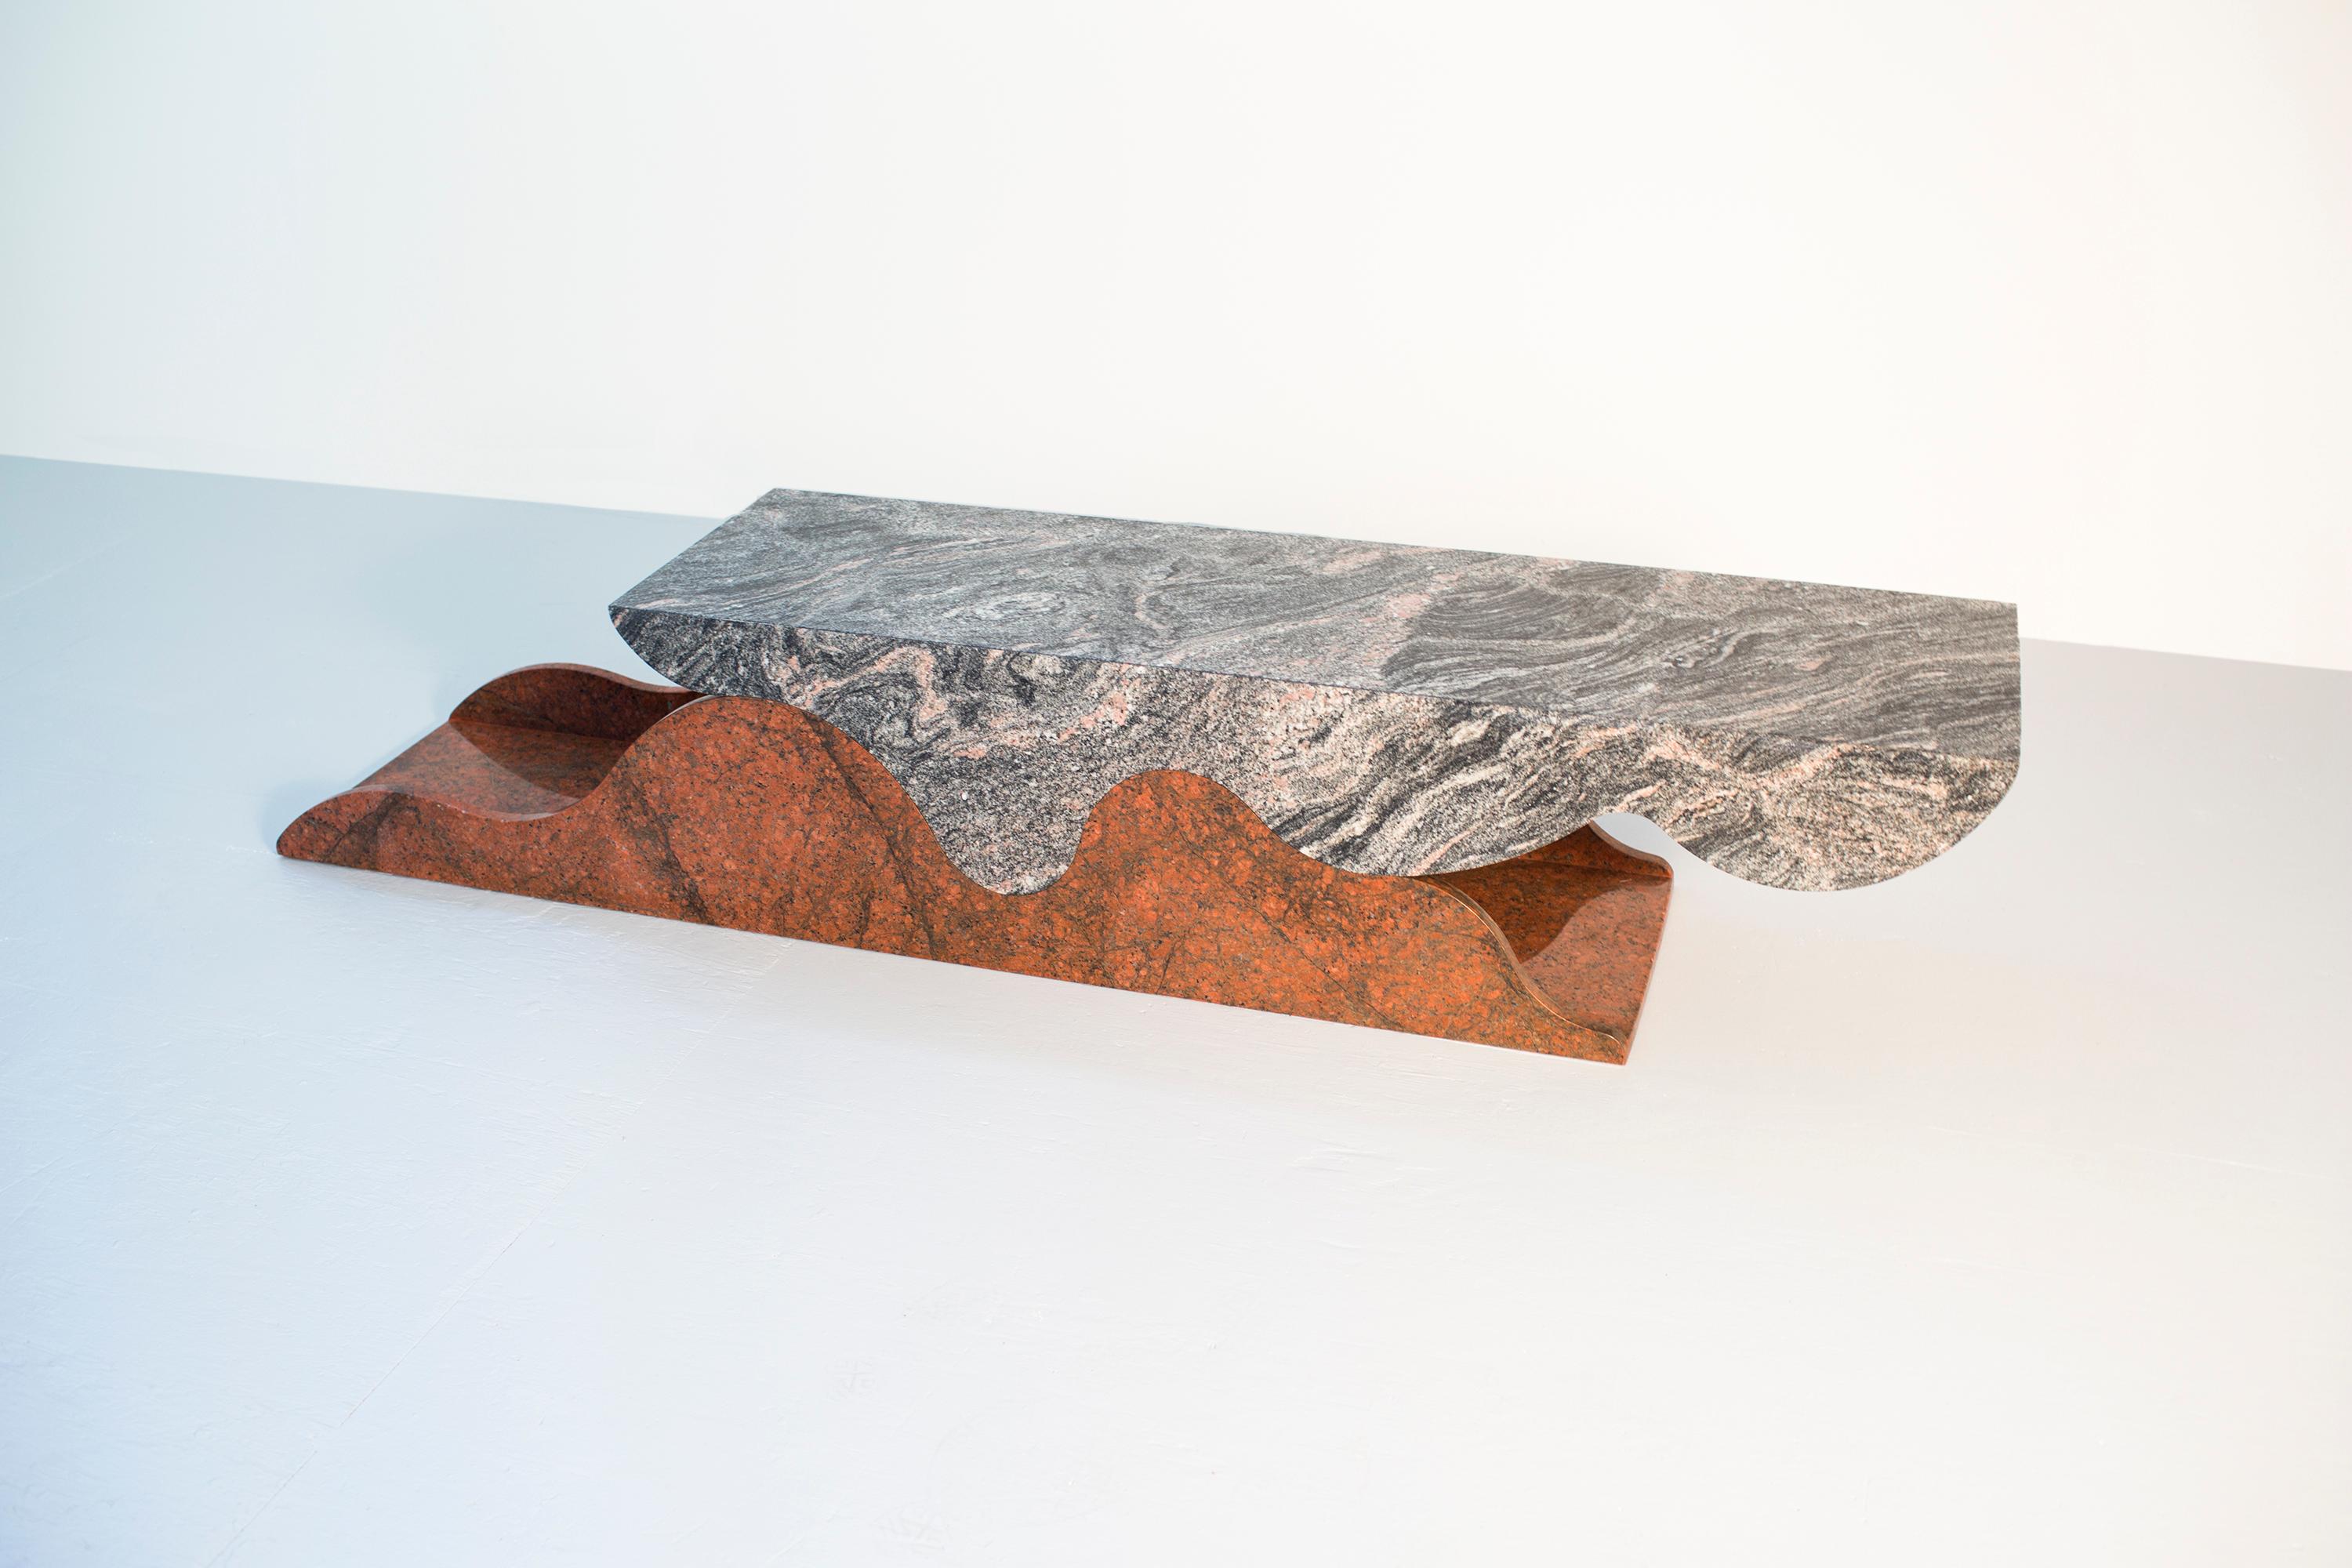 The Gaspar table is 2 pieces of granite formed to join each other, creating a surface at coffee table or console height.

The interior of the table can be used to store items like magazines or various display materials.

The top of the table surface